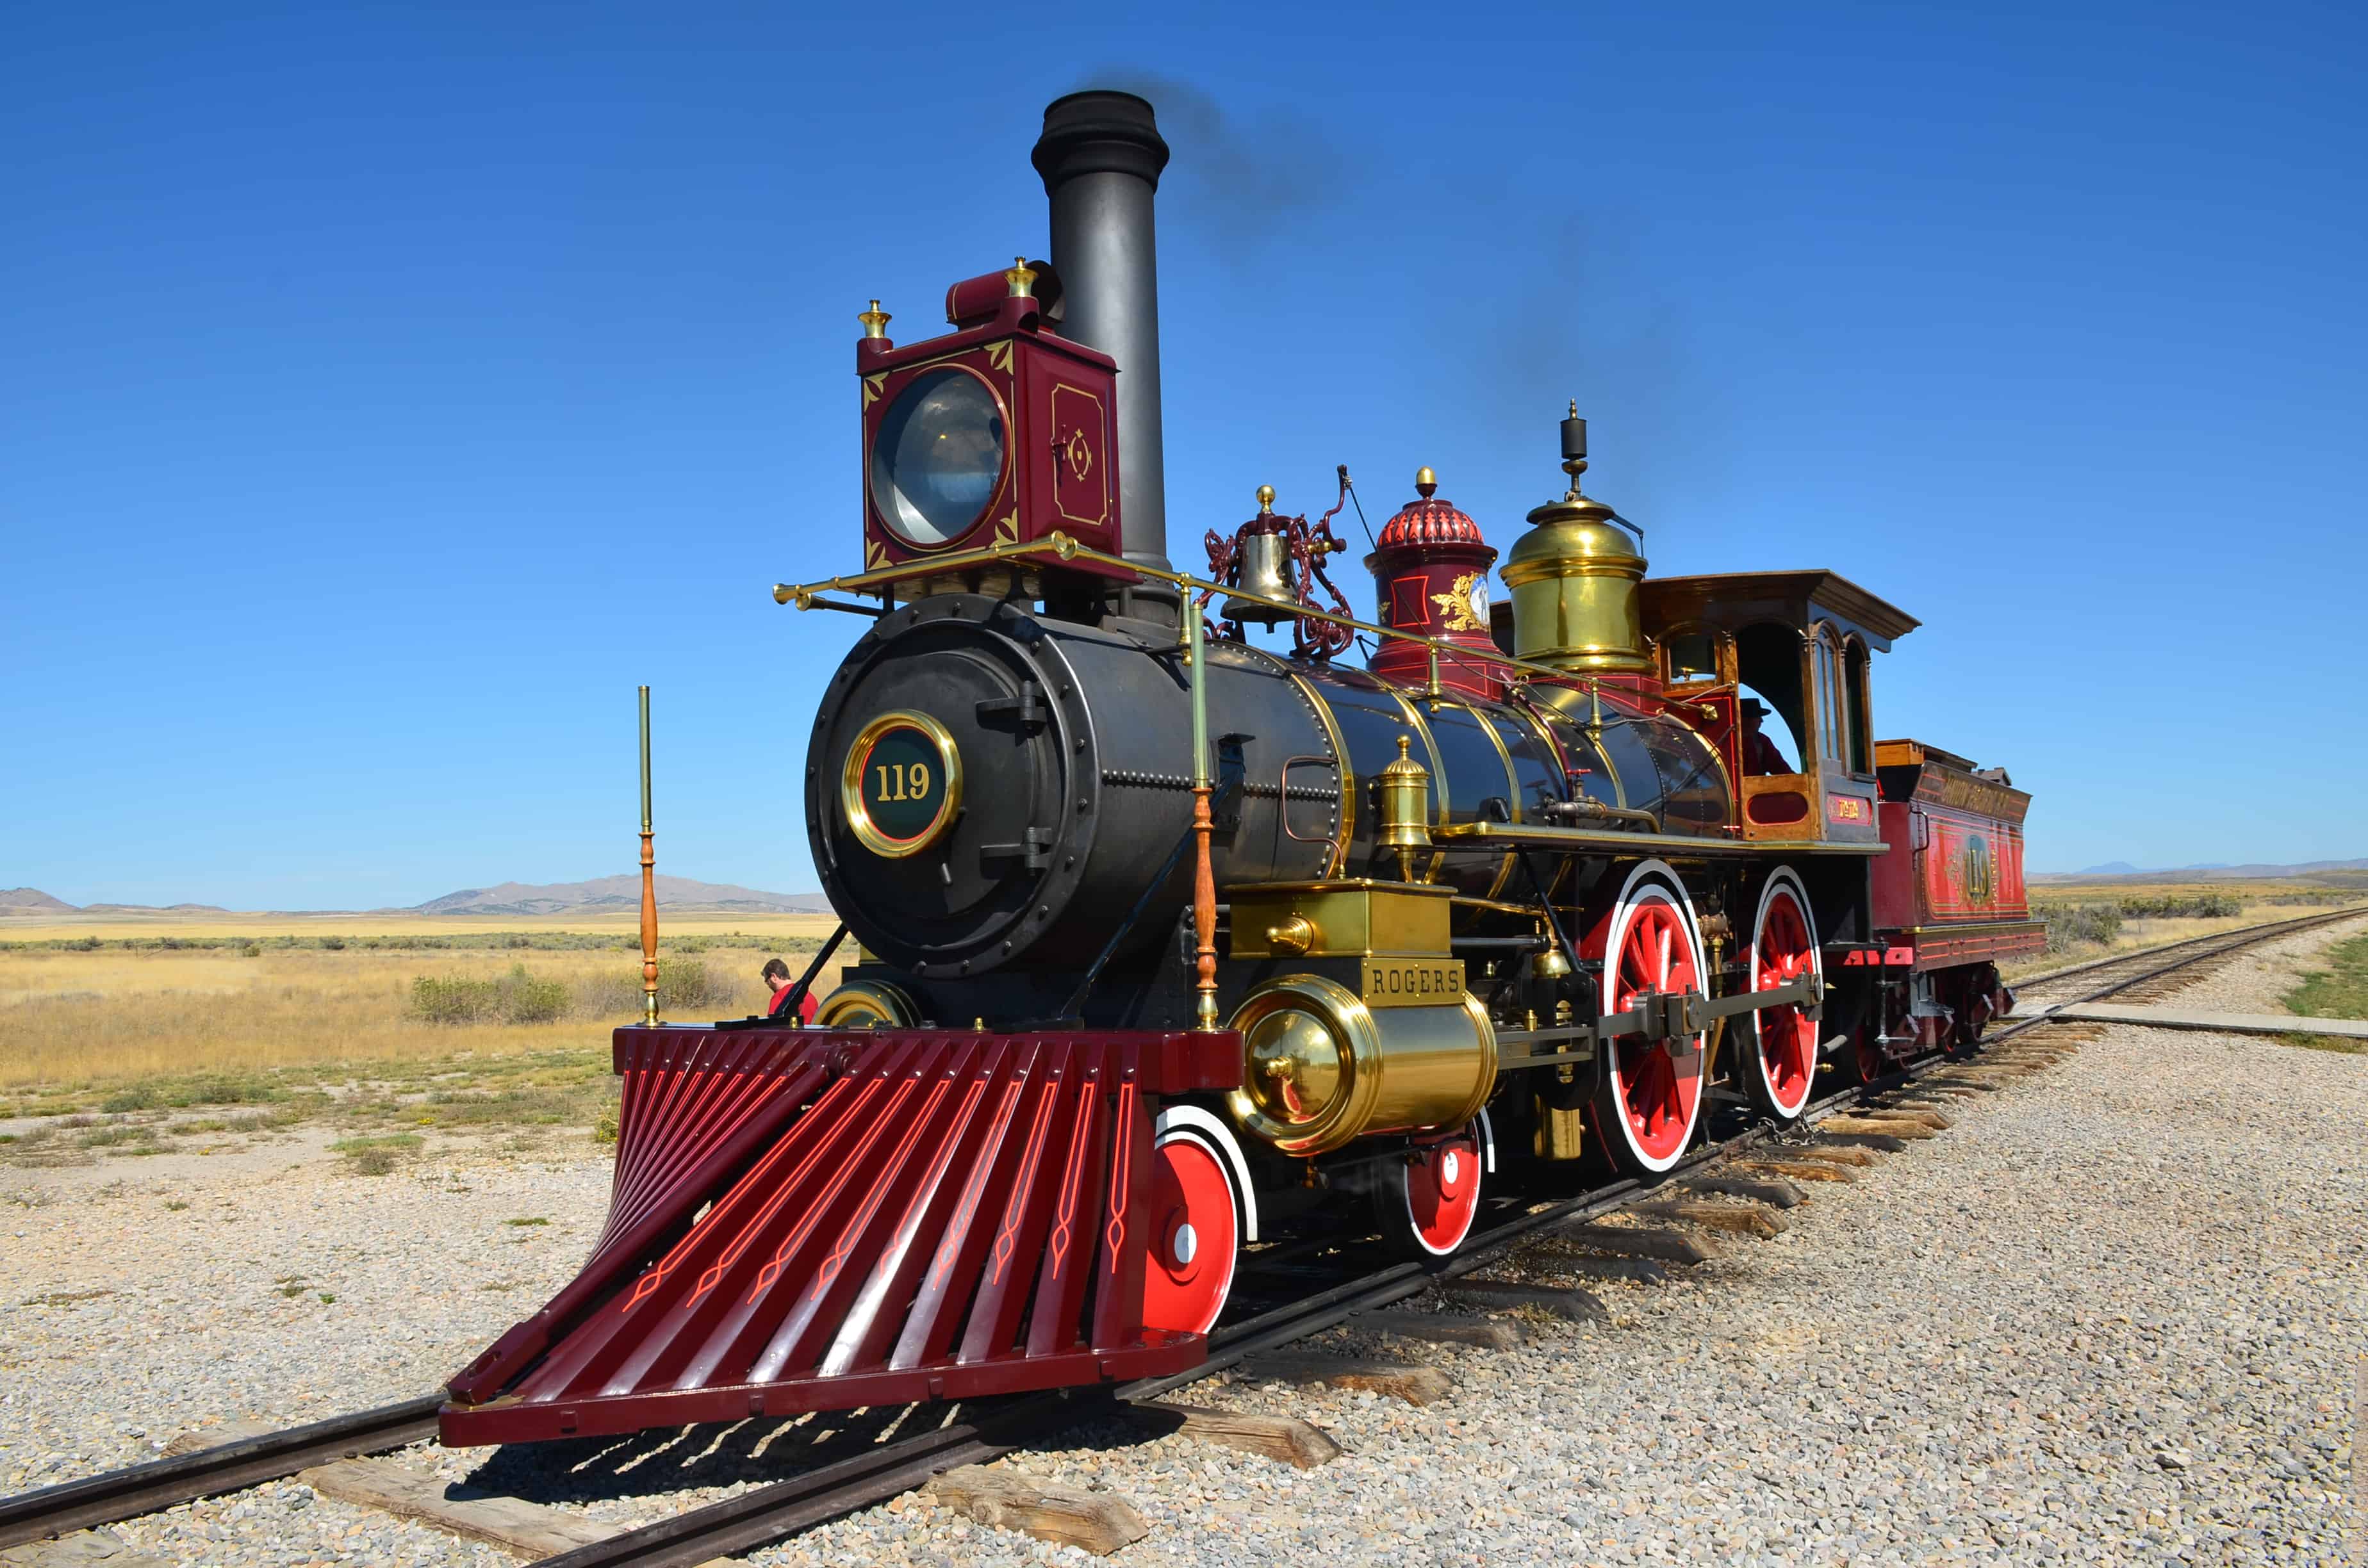 Union Pacific No. 119 at Golden Spike National Historical Park, Promontory Summit, Utah